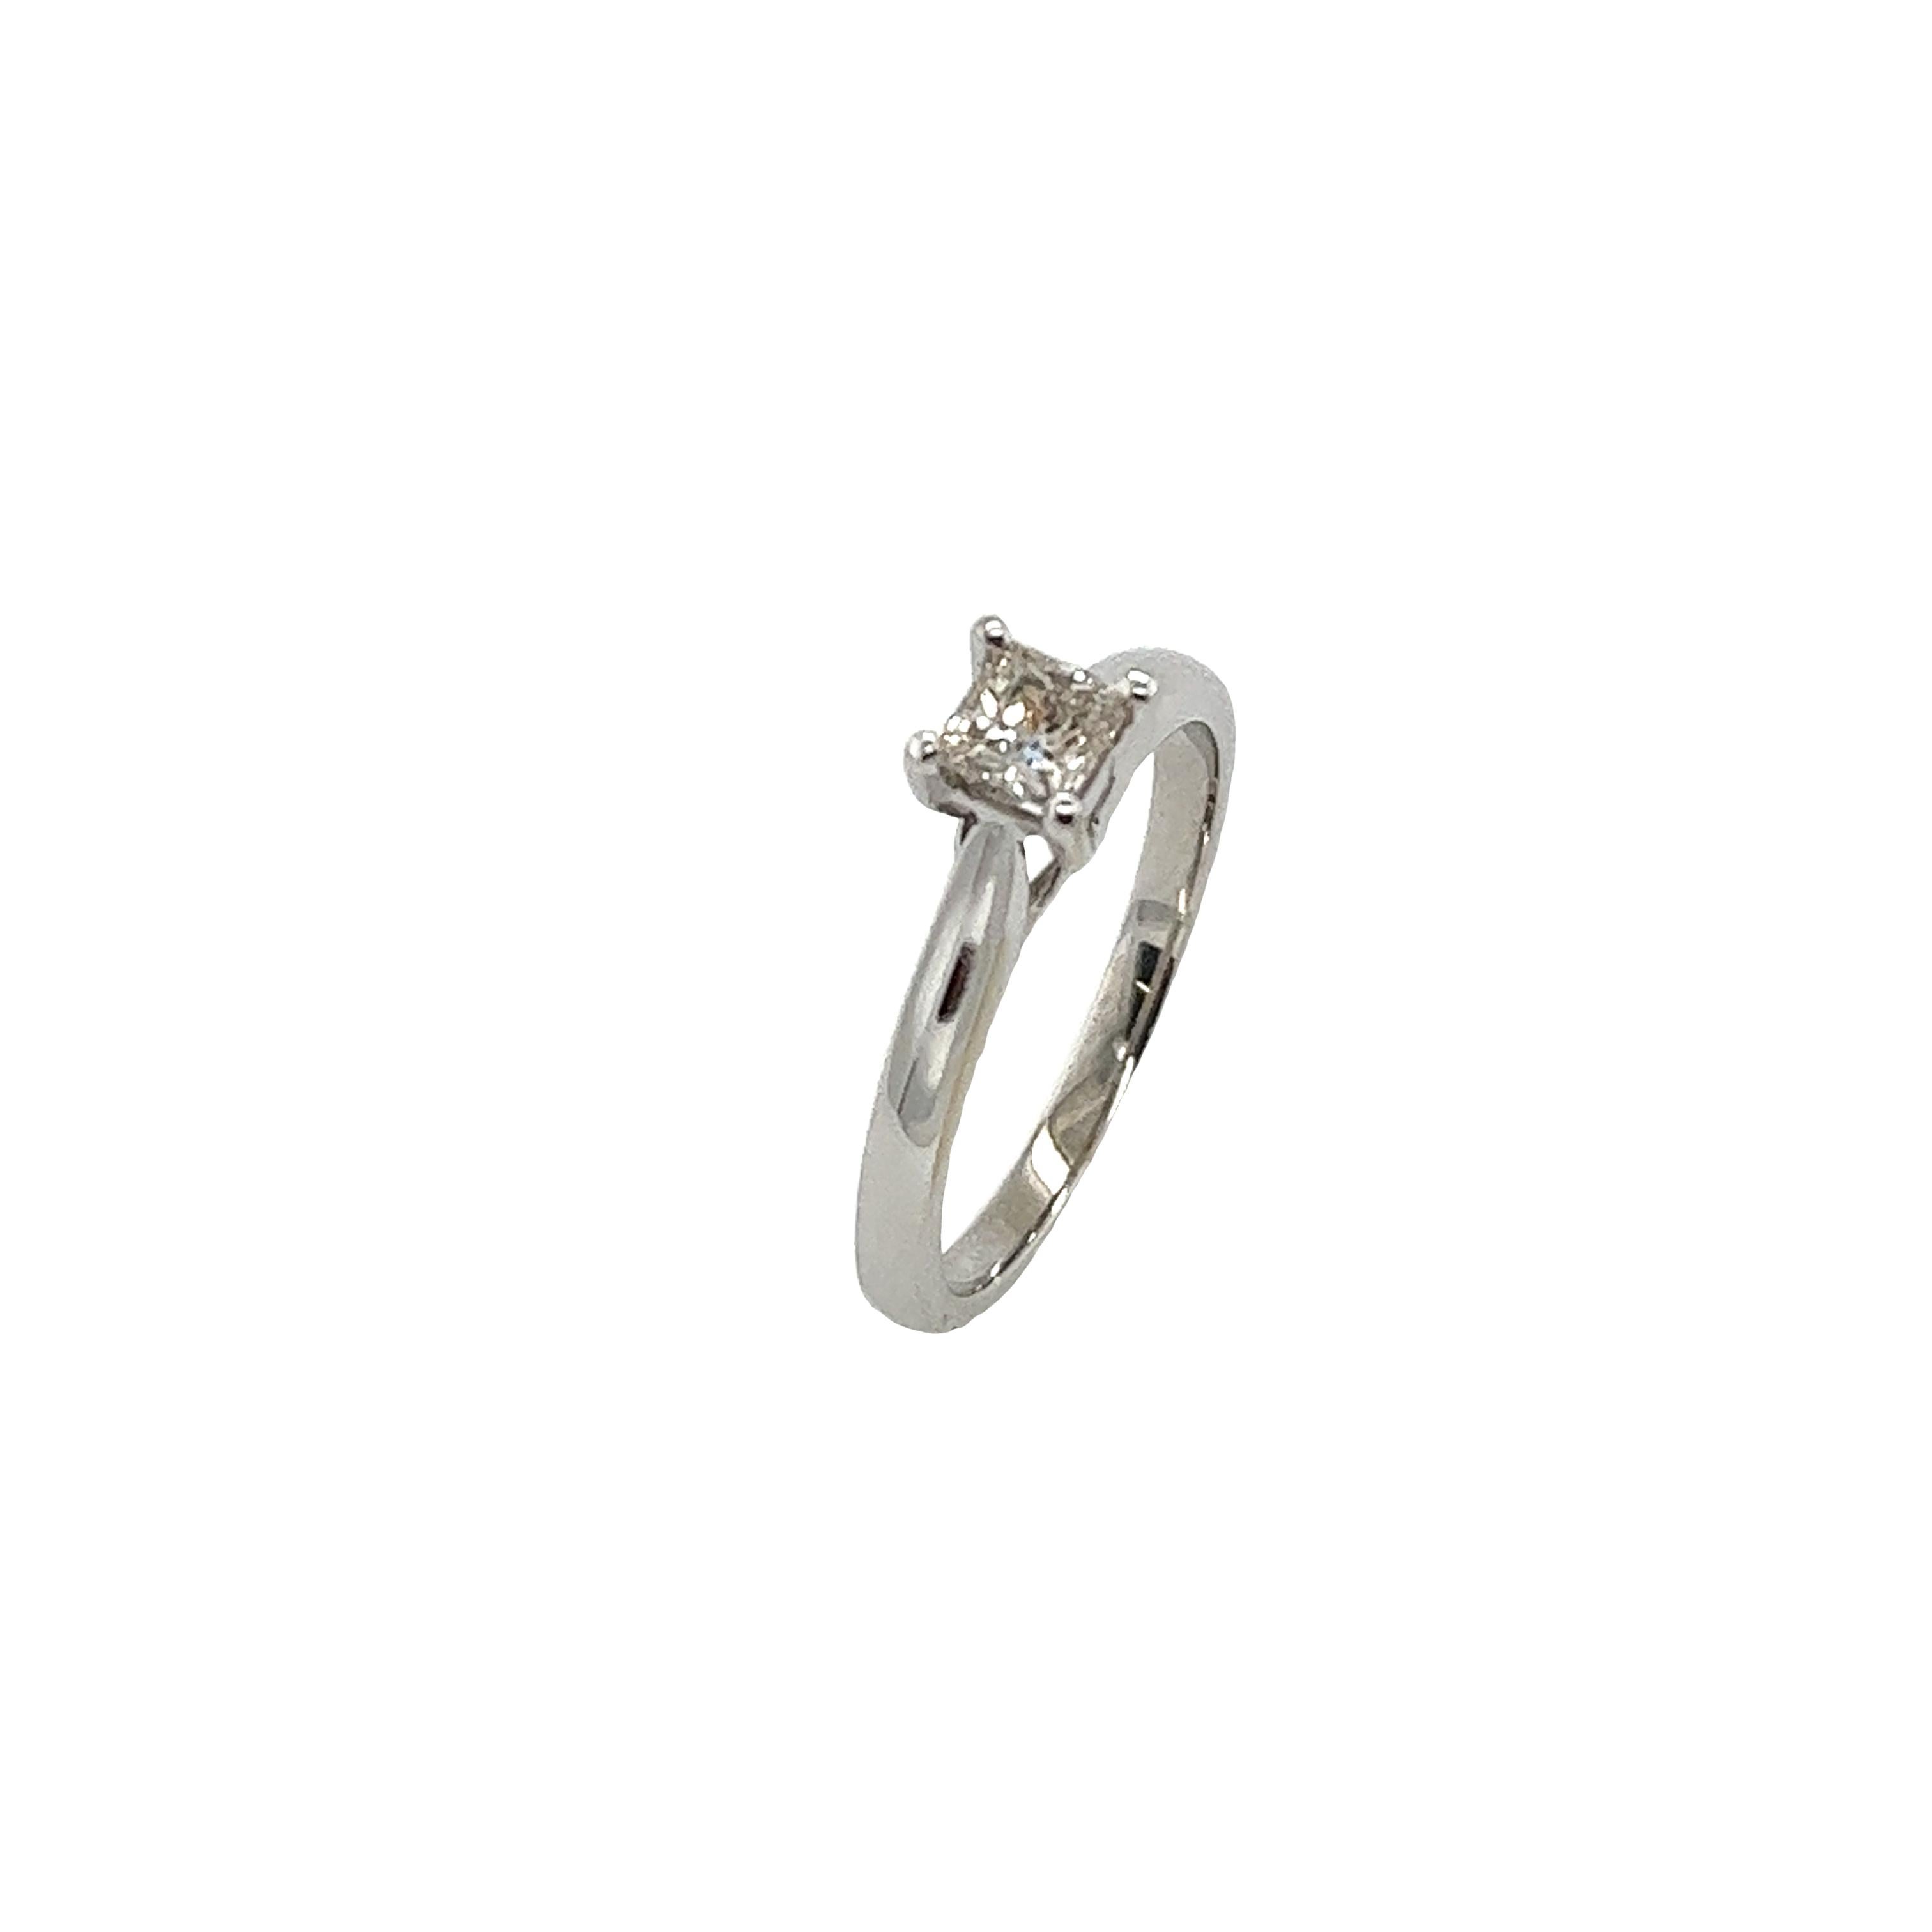 9ct White Gold Solitaire Diamond Ring Set With 0.40ct Princess Cut Diamond For Sale 2